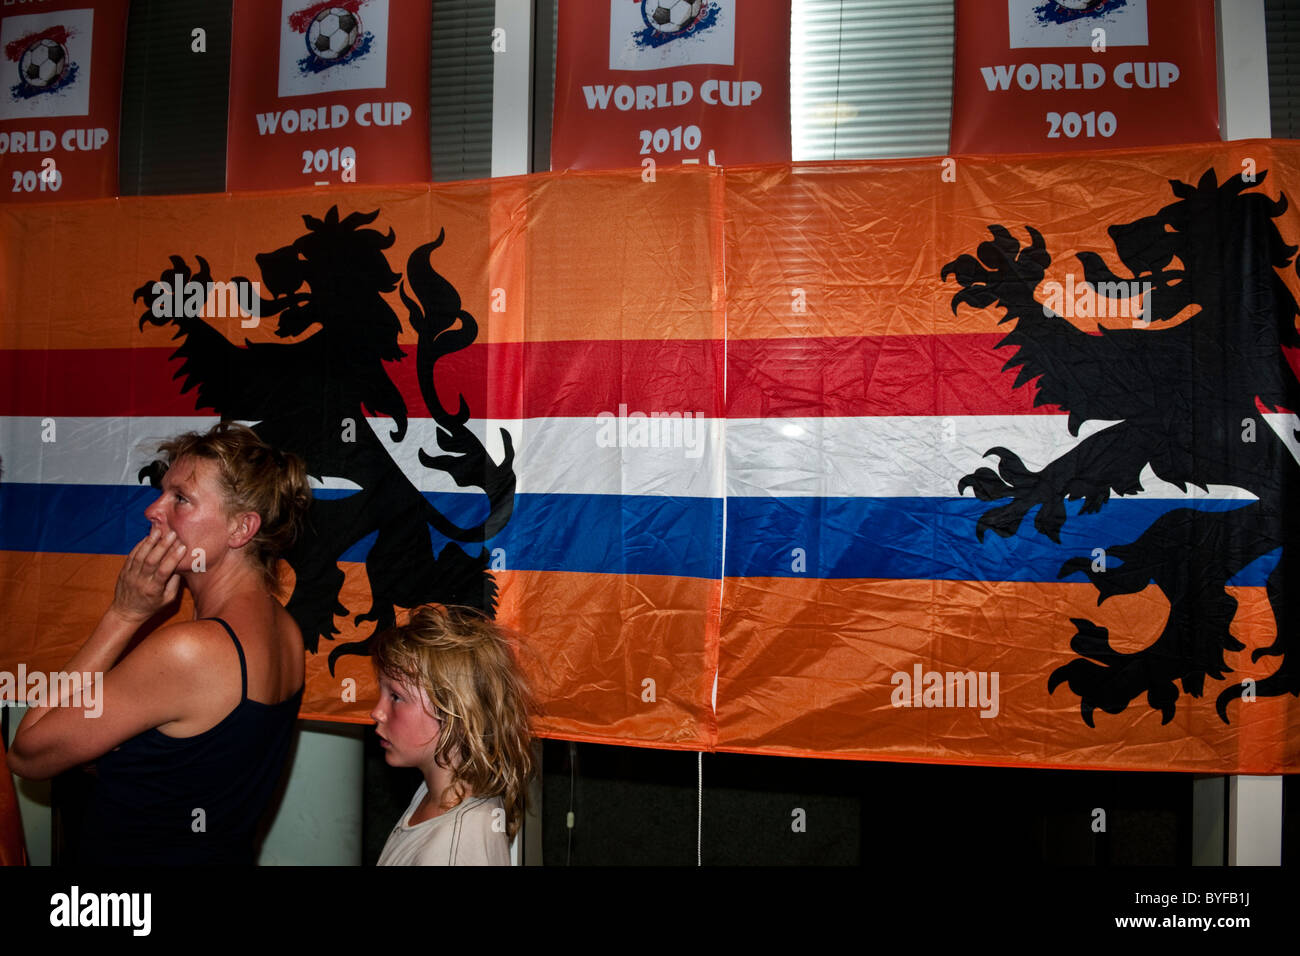 July 12, 2010 World Cup Final between Spain and the Netherlands at the Dutch embassy in Bangkok. Stock Photo